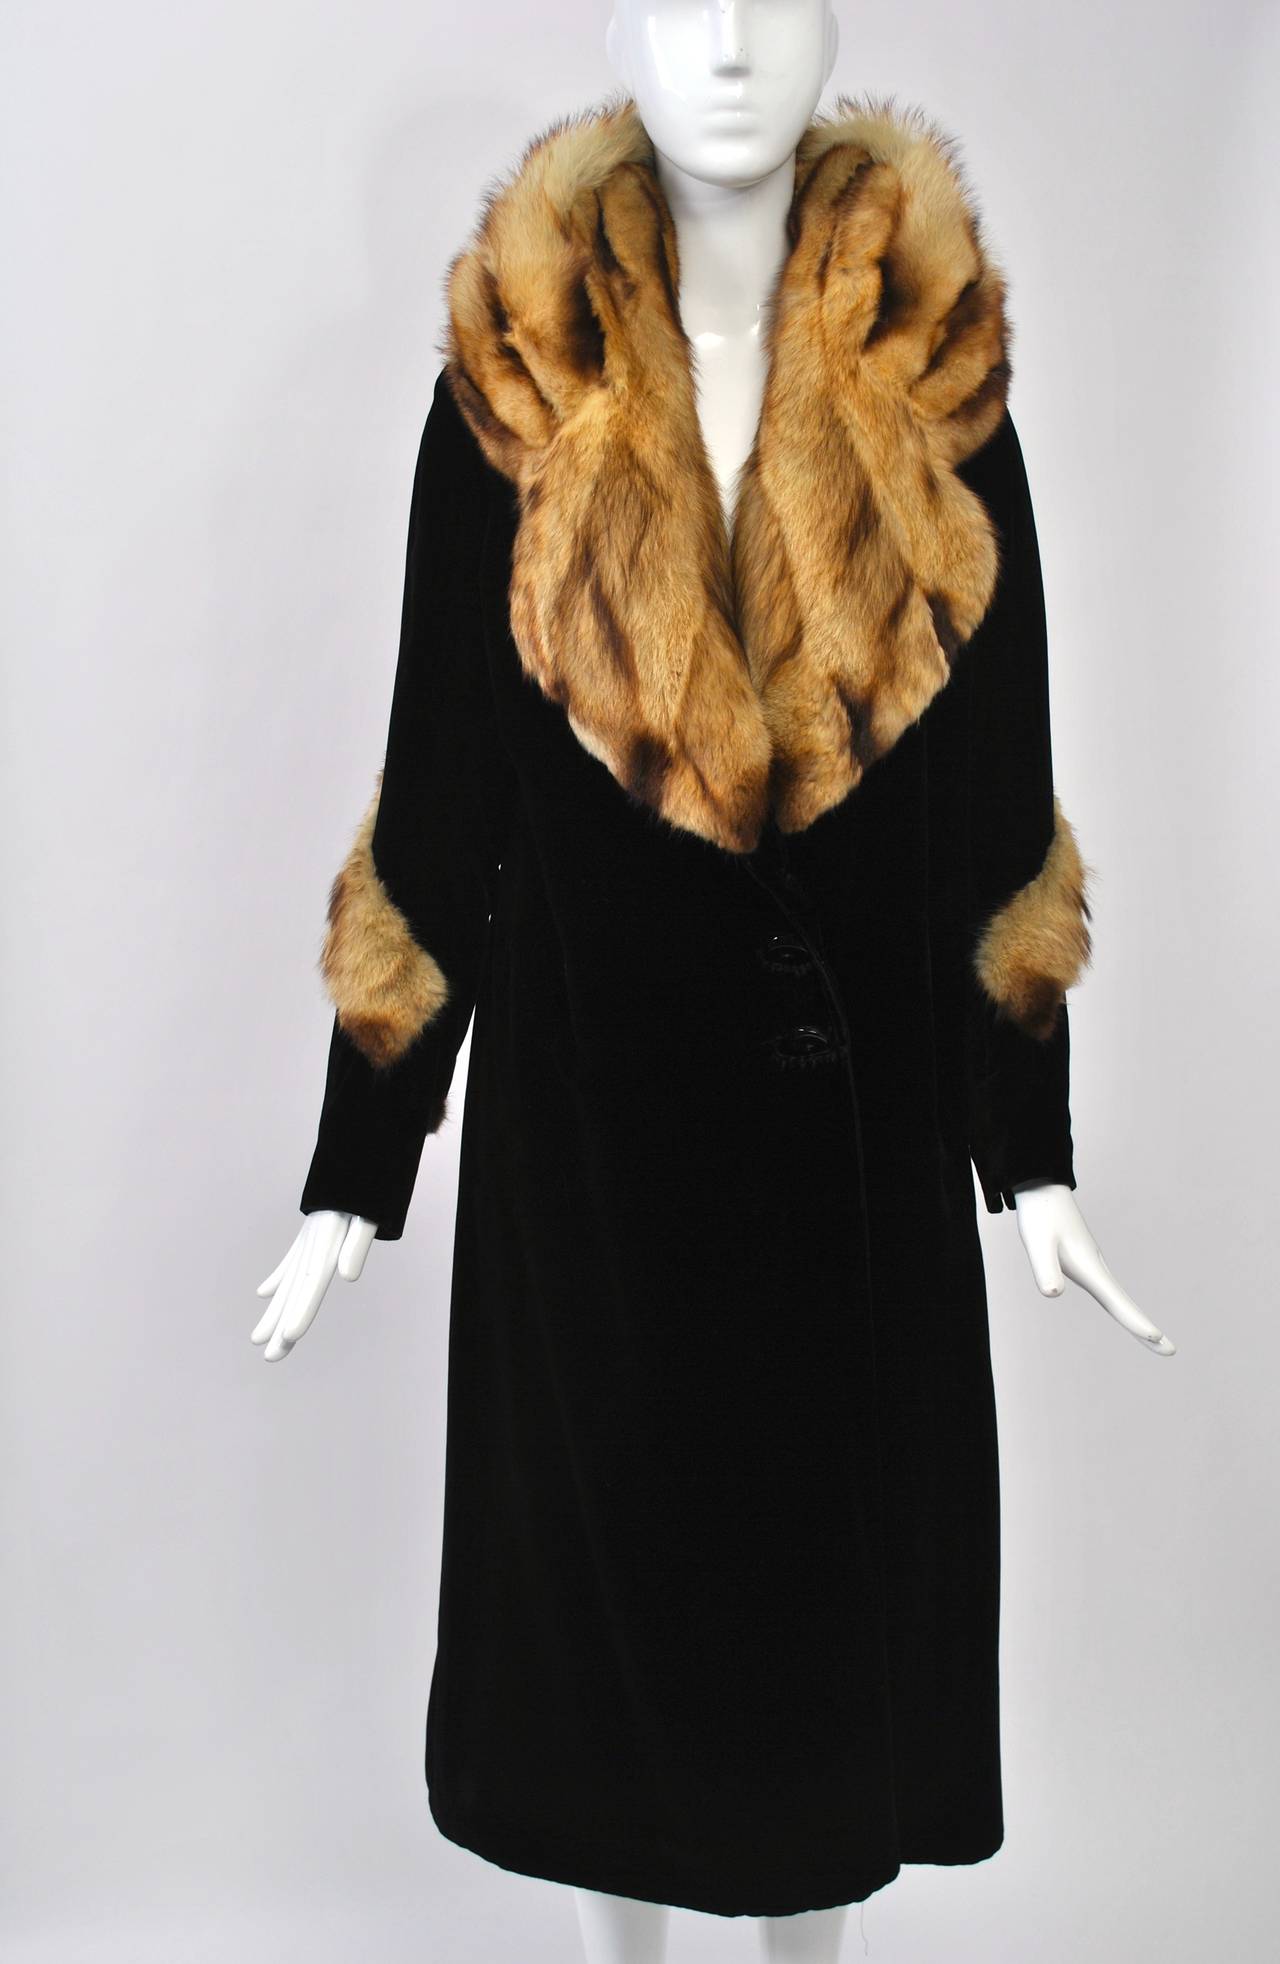 Art Deco evening coat of black velvet featuring a huge fur collar, possibly fitch, that curves up into the neck before settling on the shoulders. Narrow, straight cut to the coat and sleeves, which are trimmed with strips of the fur diagonally